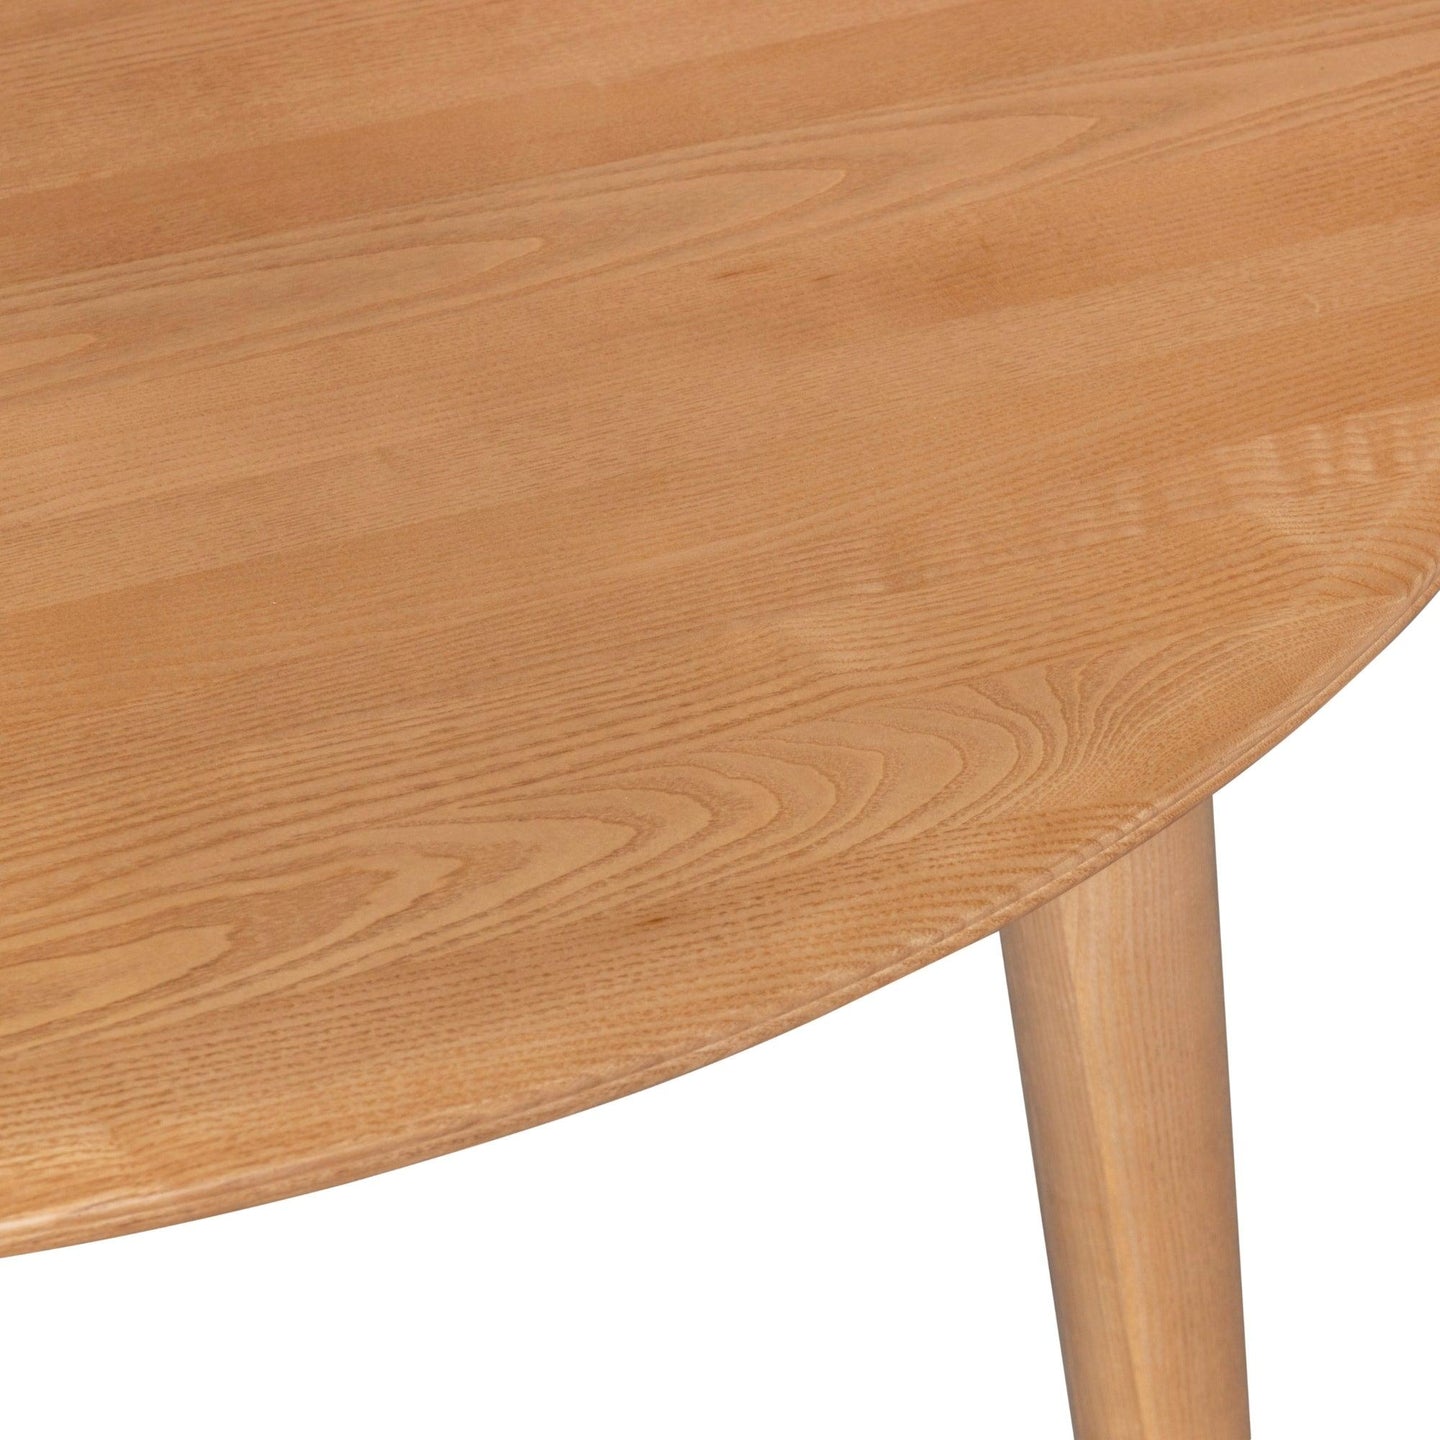 Buy Emilio 120cm Round Dining Table Scandinavian Style Solid Ash Wood Oak discounted | Products On Sale Australia